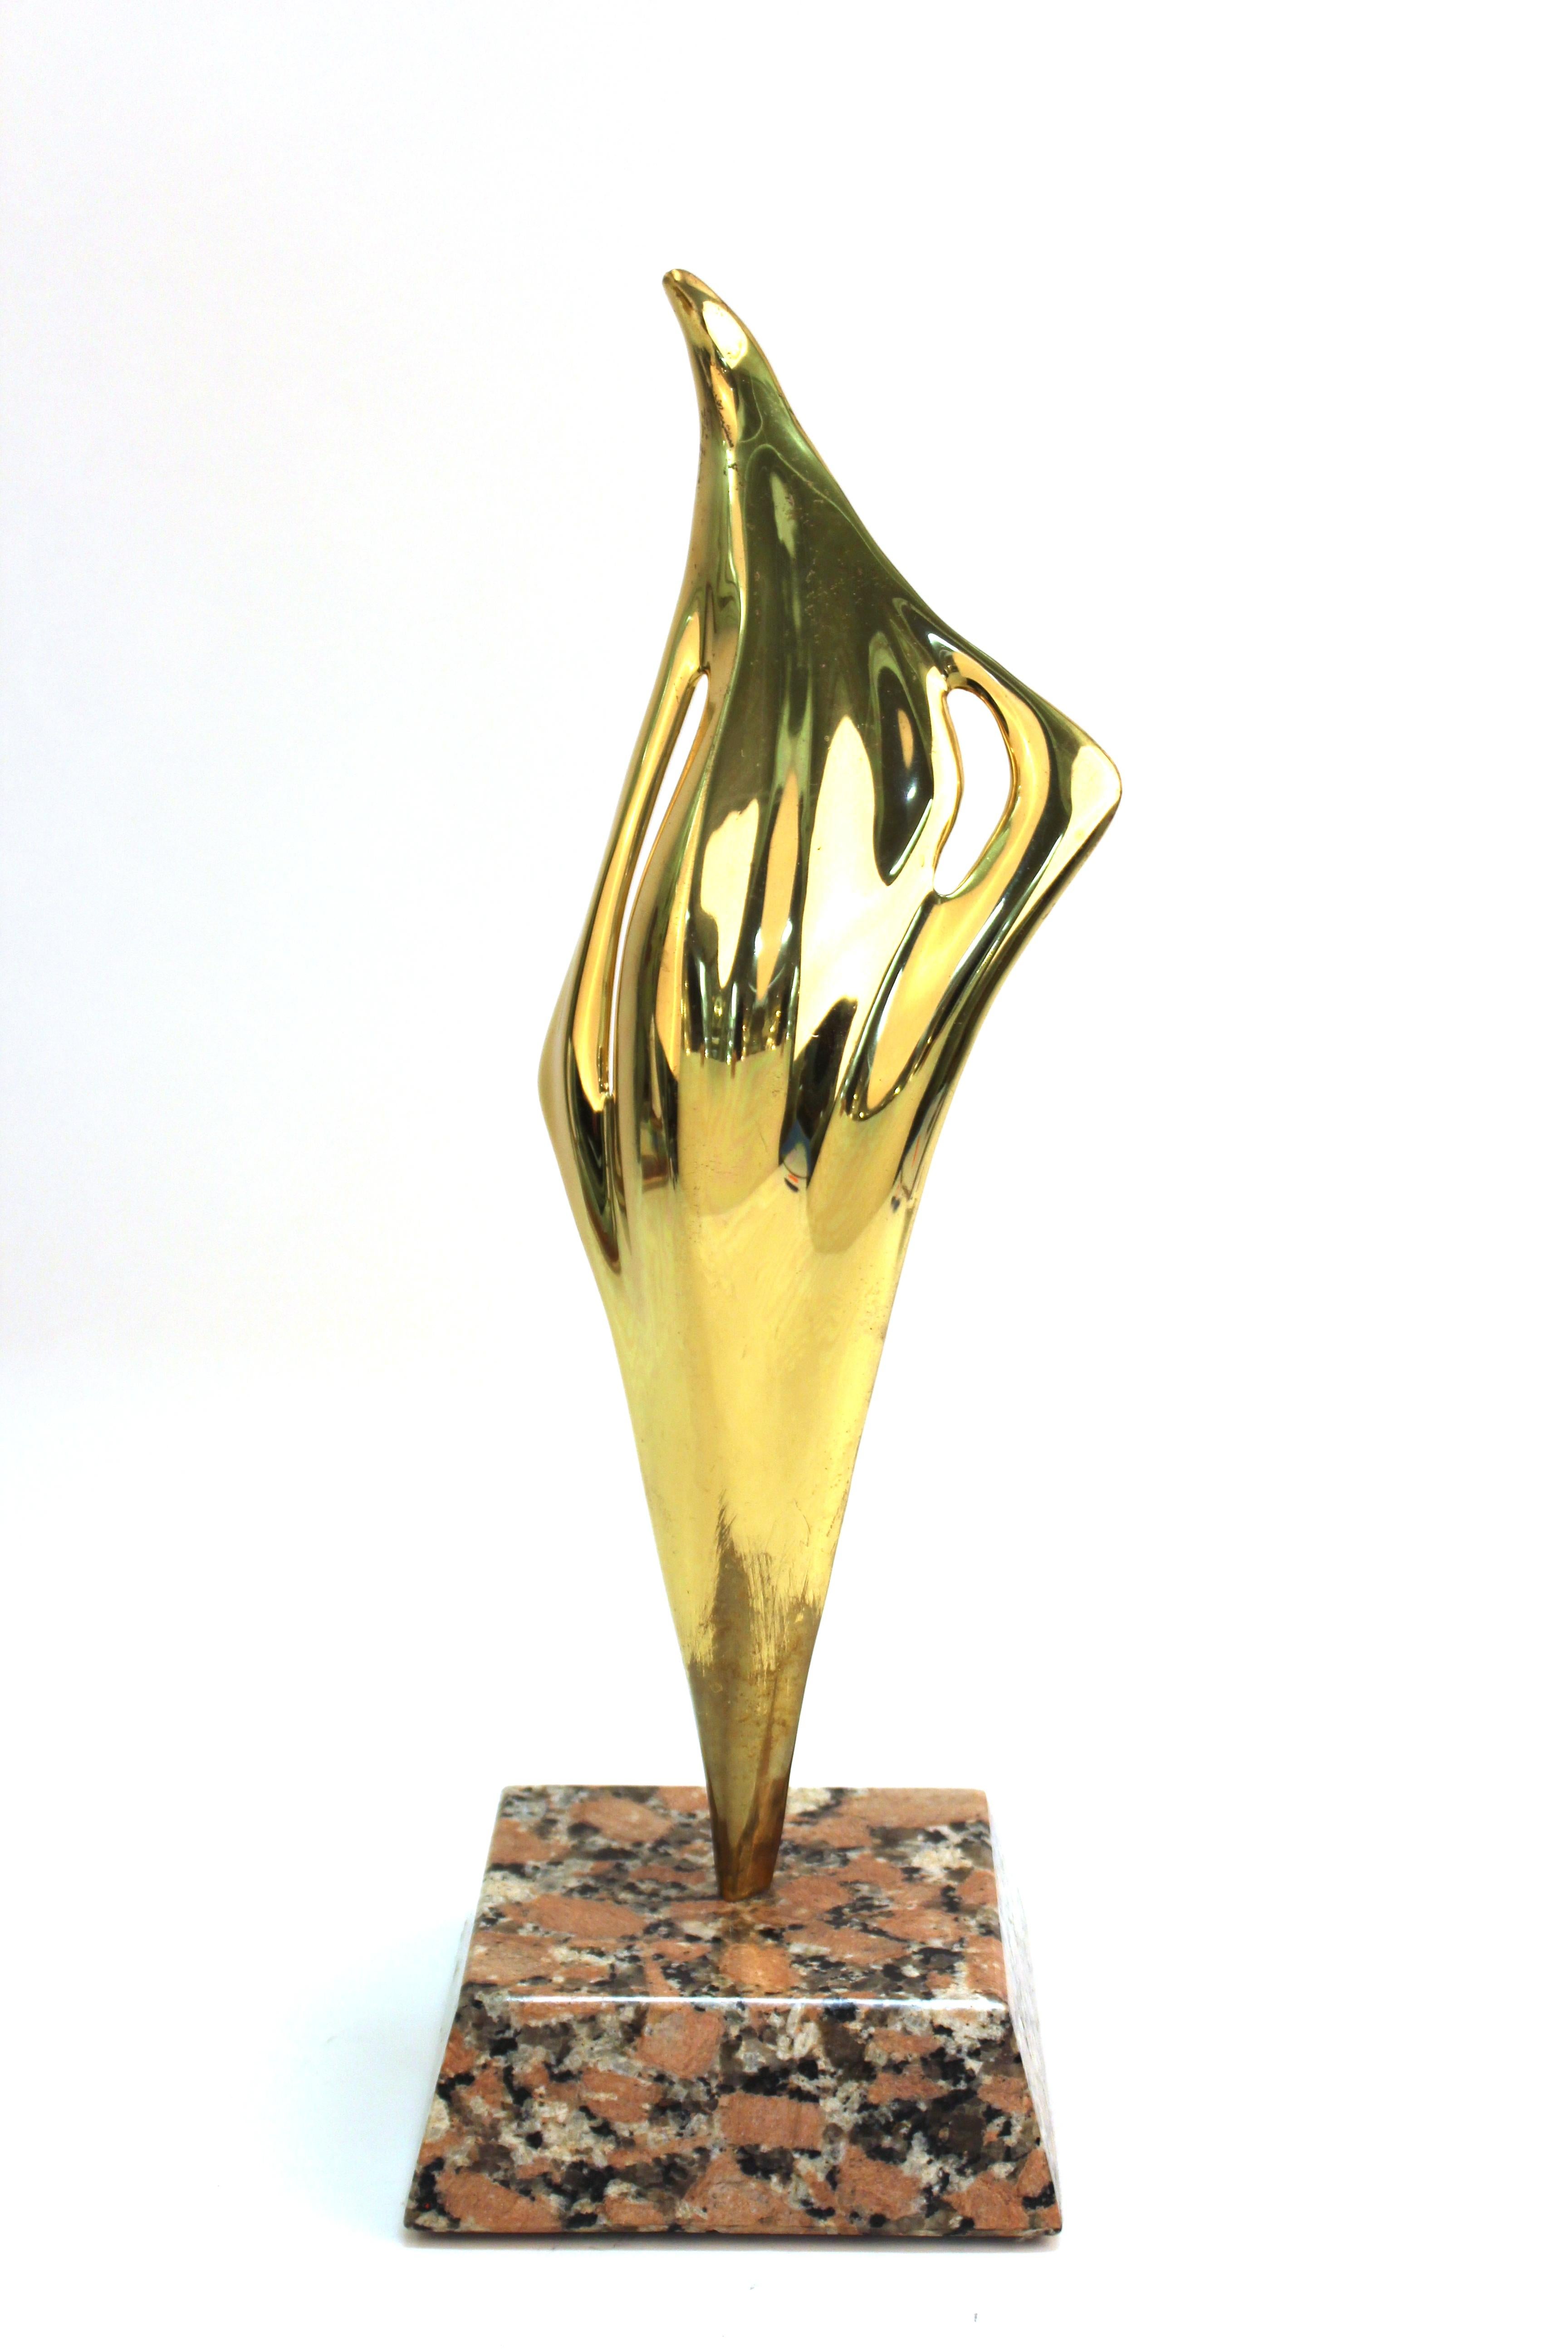 Modern abstract tabletop sculpture made by Ray Tanner. The piece is made of brass and is mounted atop a marble base. Signed by the artist, dated 2002 and numbered #23. In great vintage condition with age-appropriate wear and use.